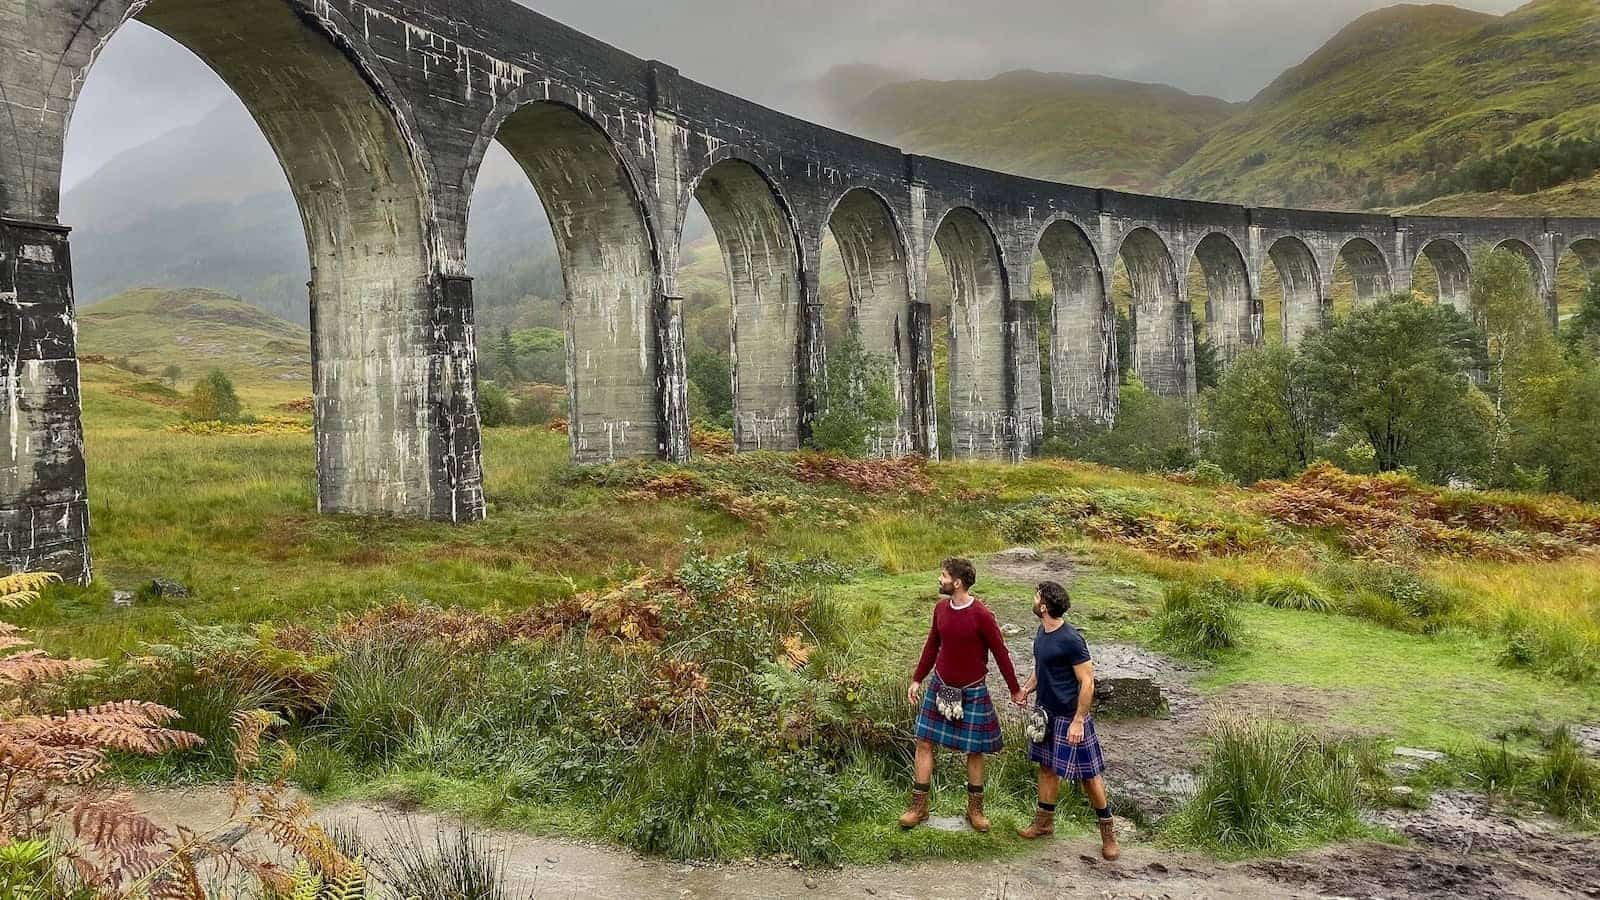 Gay couple in kilts at the Glenfinnan Viaduct, Scotland.